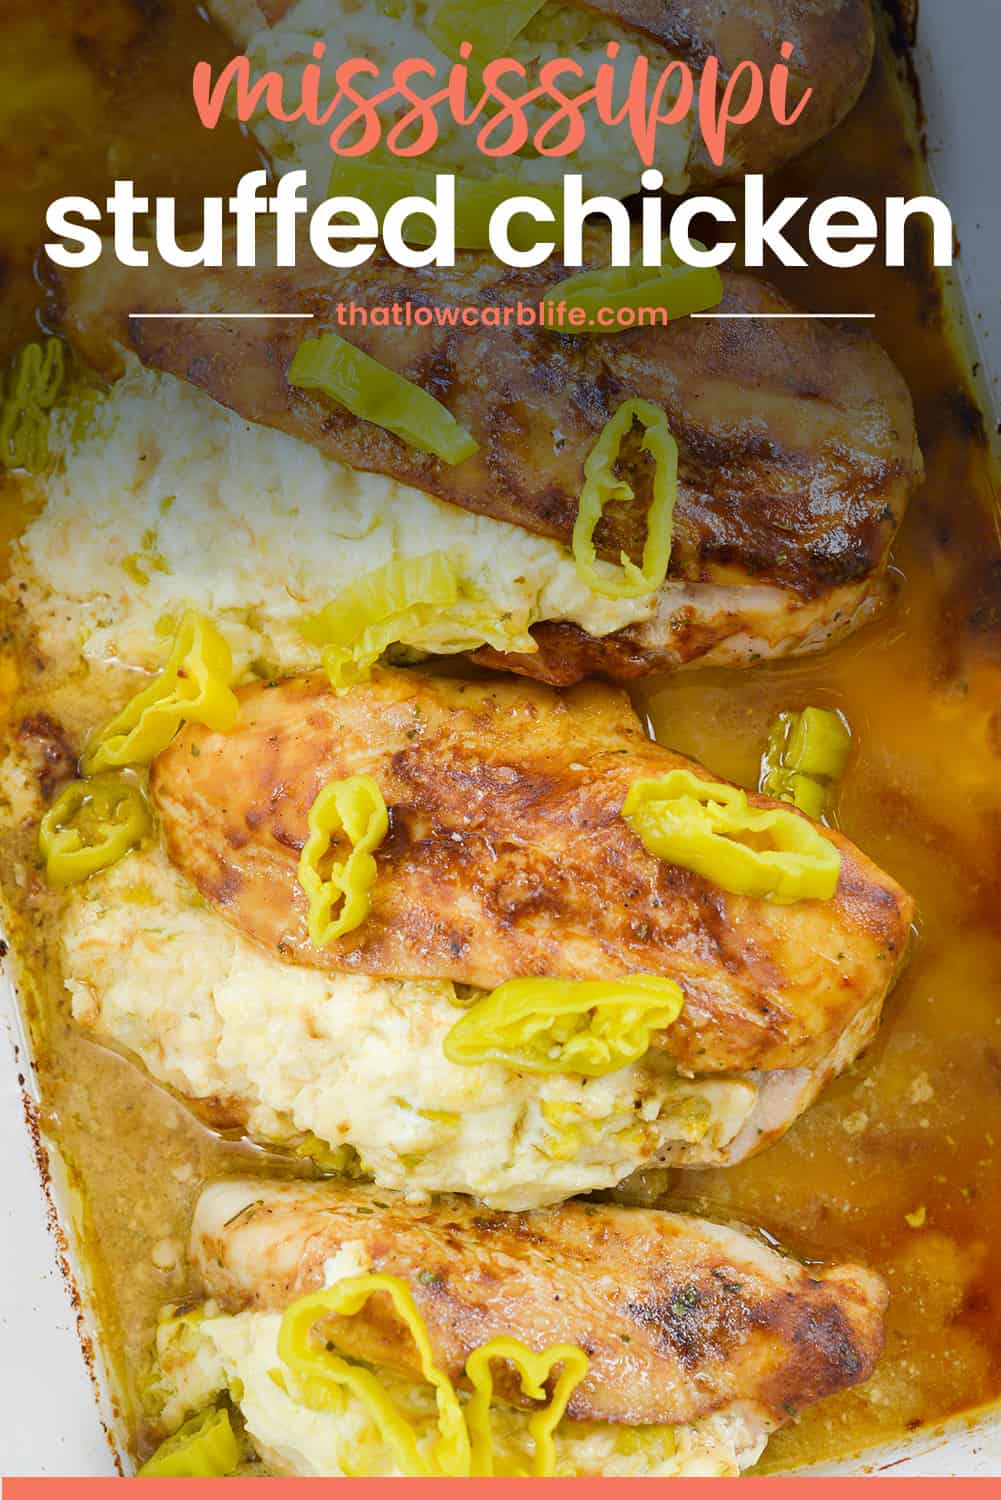 mississippi stuffed chicken in bakign dish with text for Pinterest.